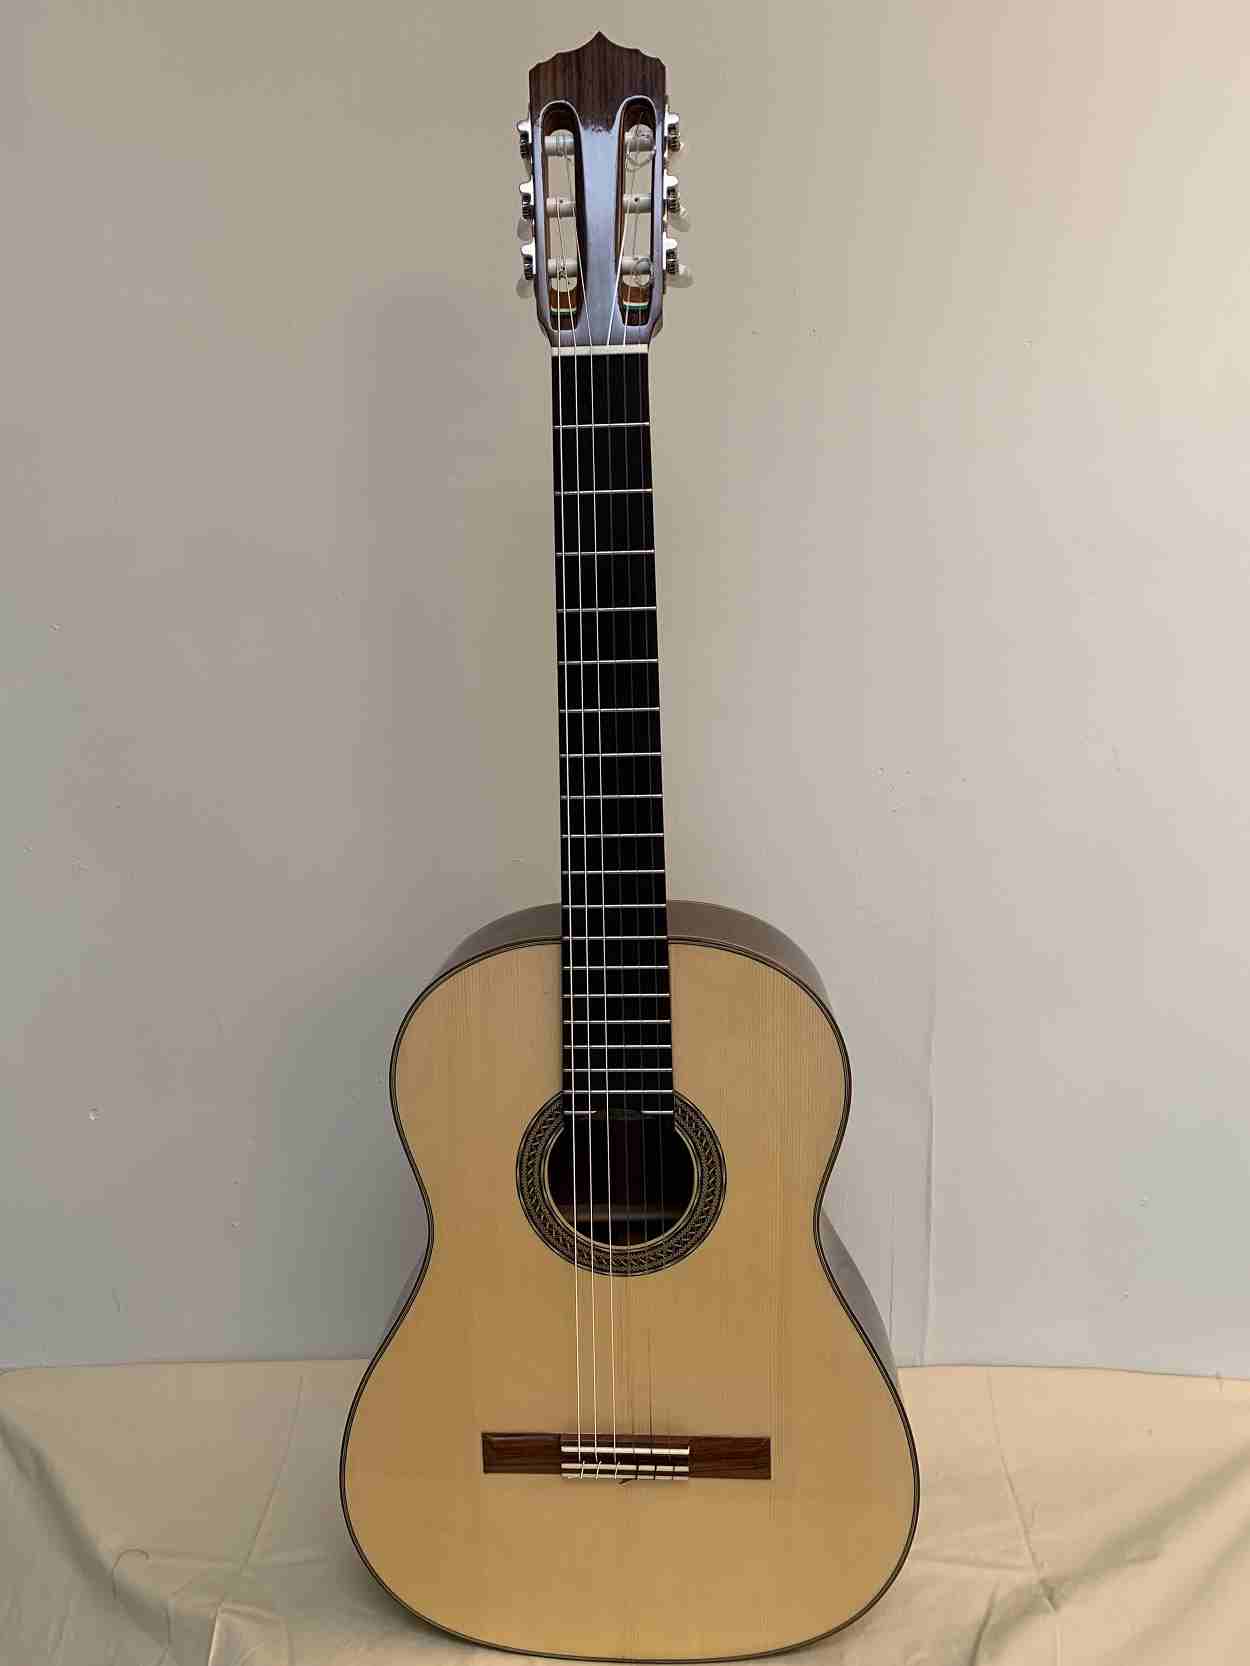 A concert classical guitar build of Spruce and Indian Rosewood